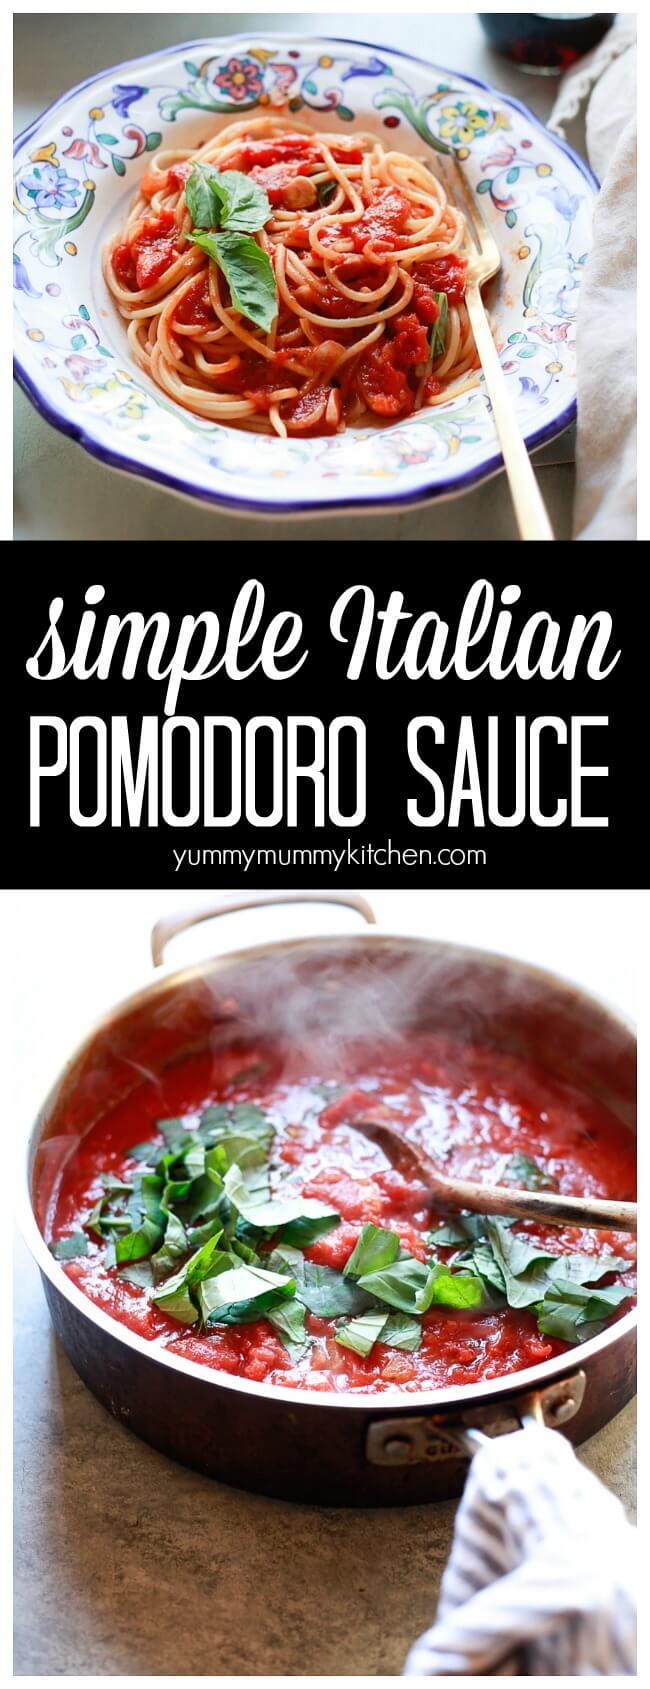 Find out how to make Pomodoro sauce. This simple Italian tomato sauce is perfect with pasta, lasagna, eggplant, and more. Find out what pomodoro sauce is, pomodoro vs. marinara, and get the easy recipe for pomodoro sauce. 